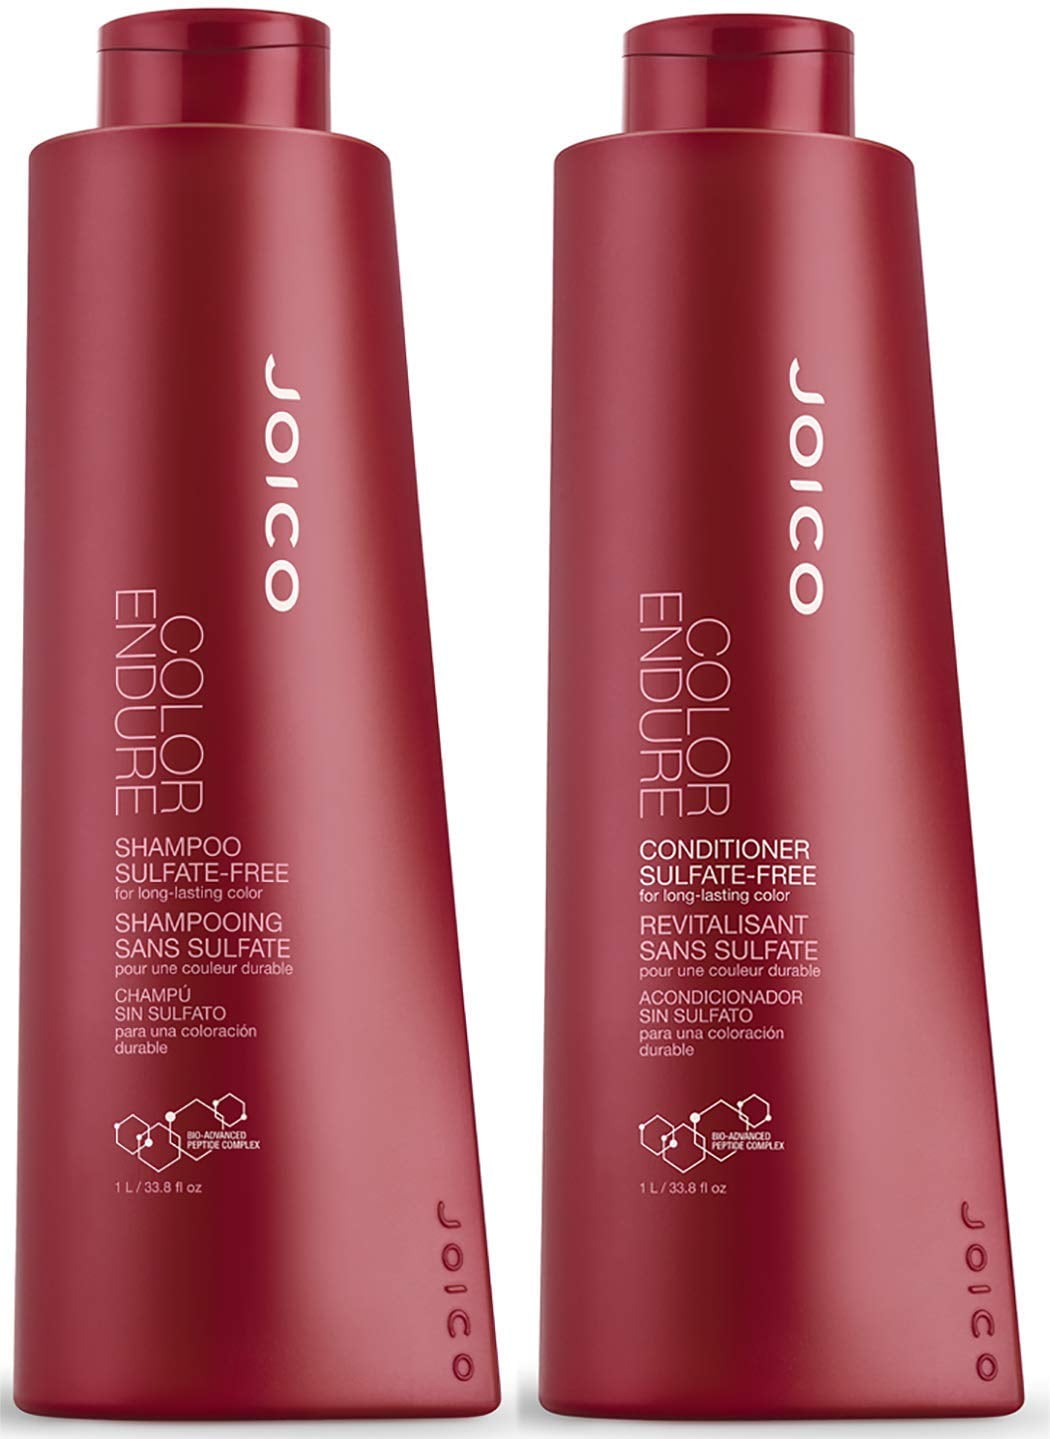 Joico Color Endure & Protection Sulfate Free Daily Shampoo & Conditioner Full Size Set - 2 - Walmart.com